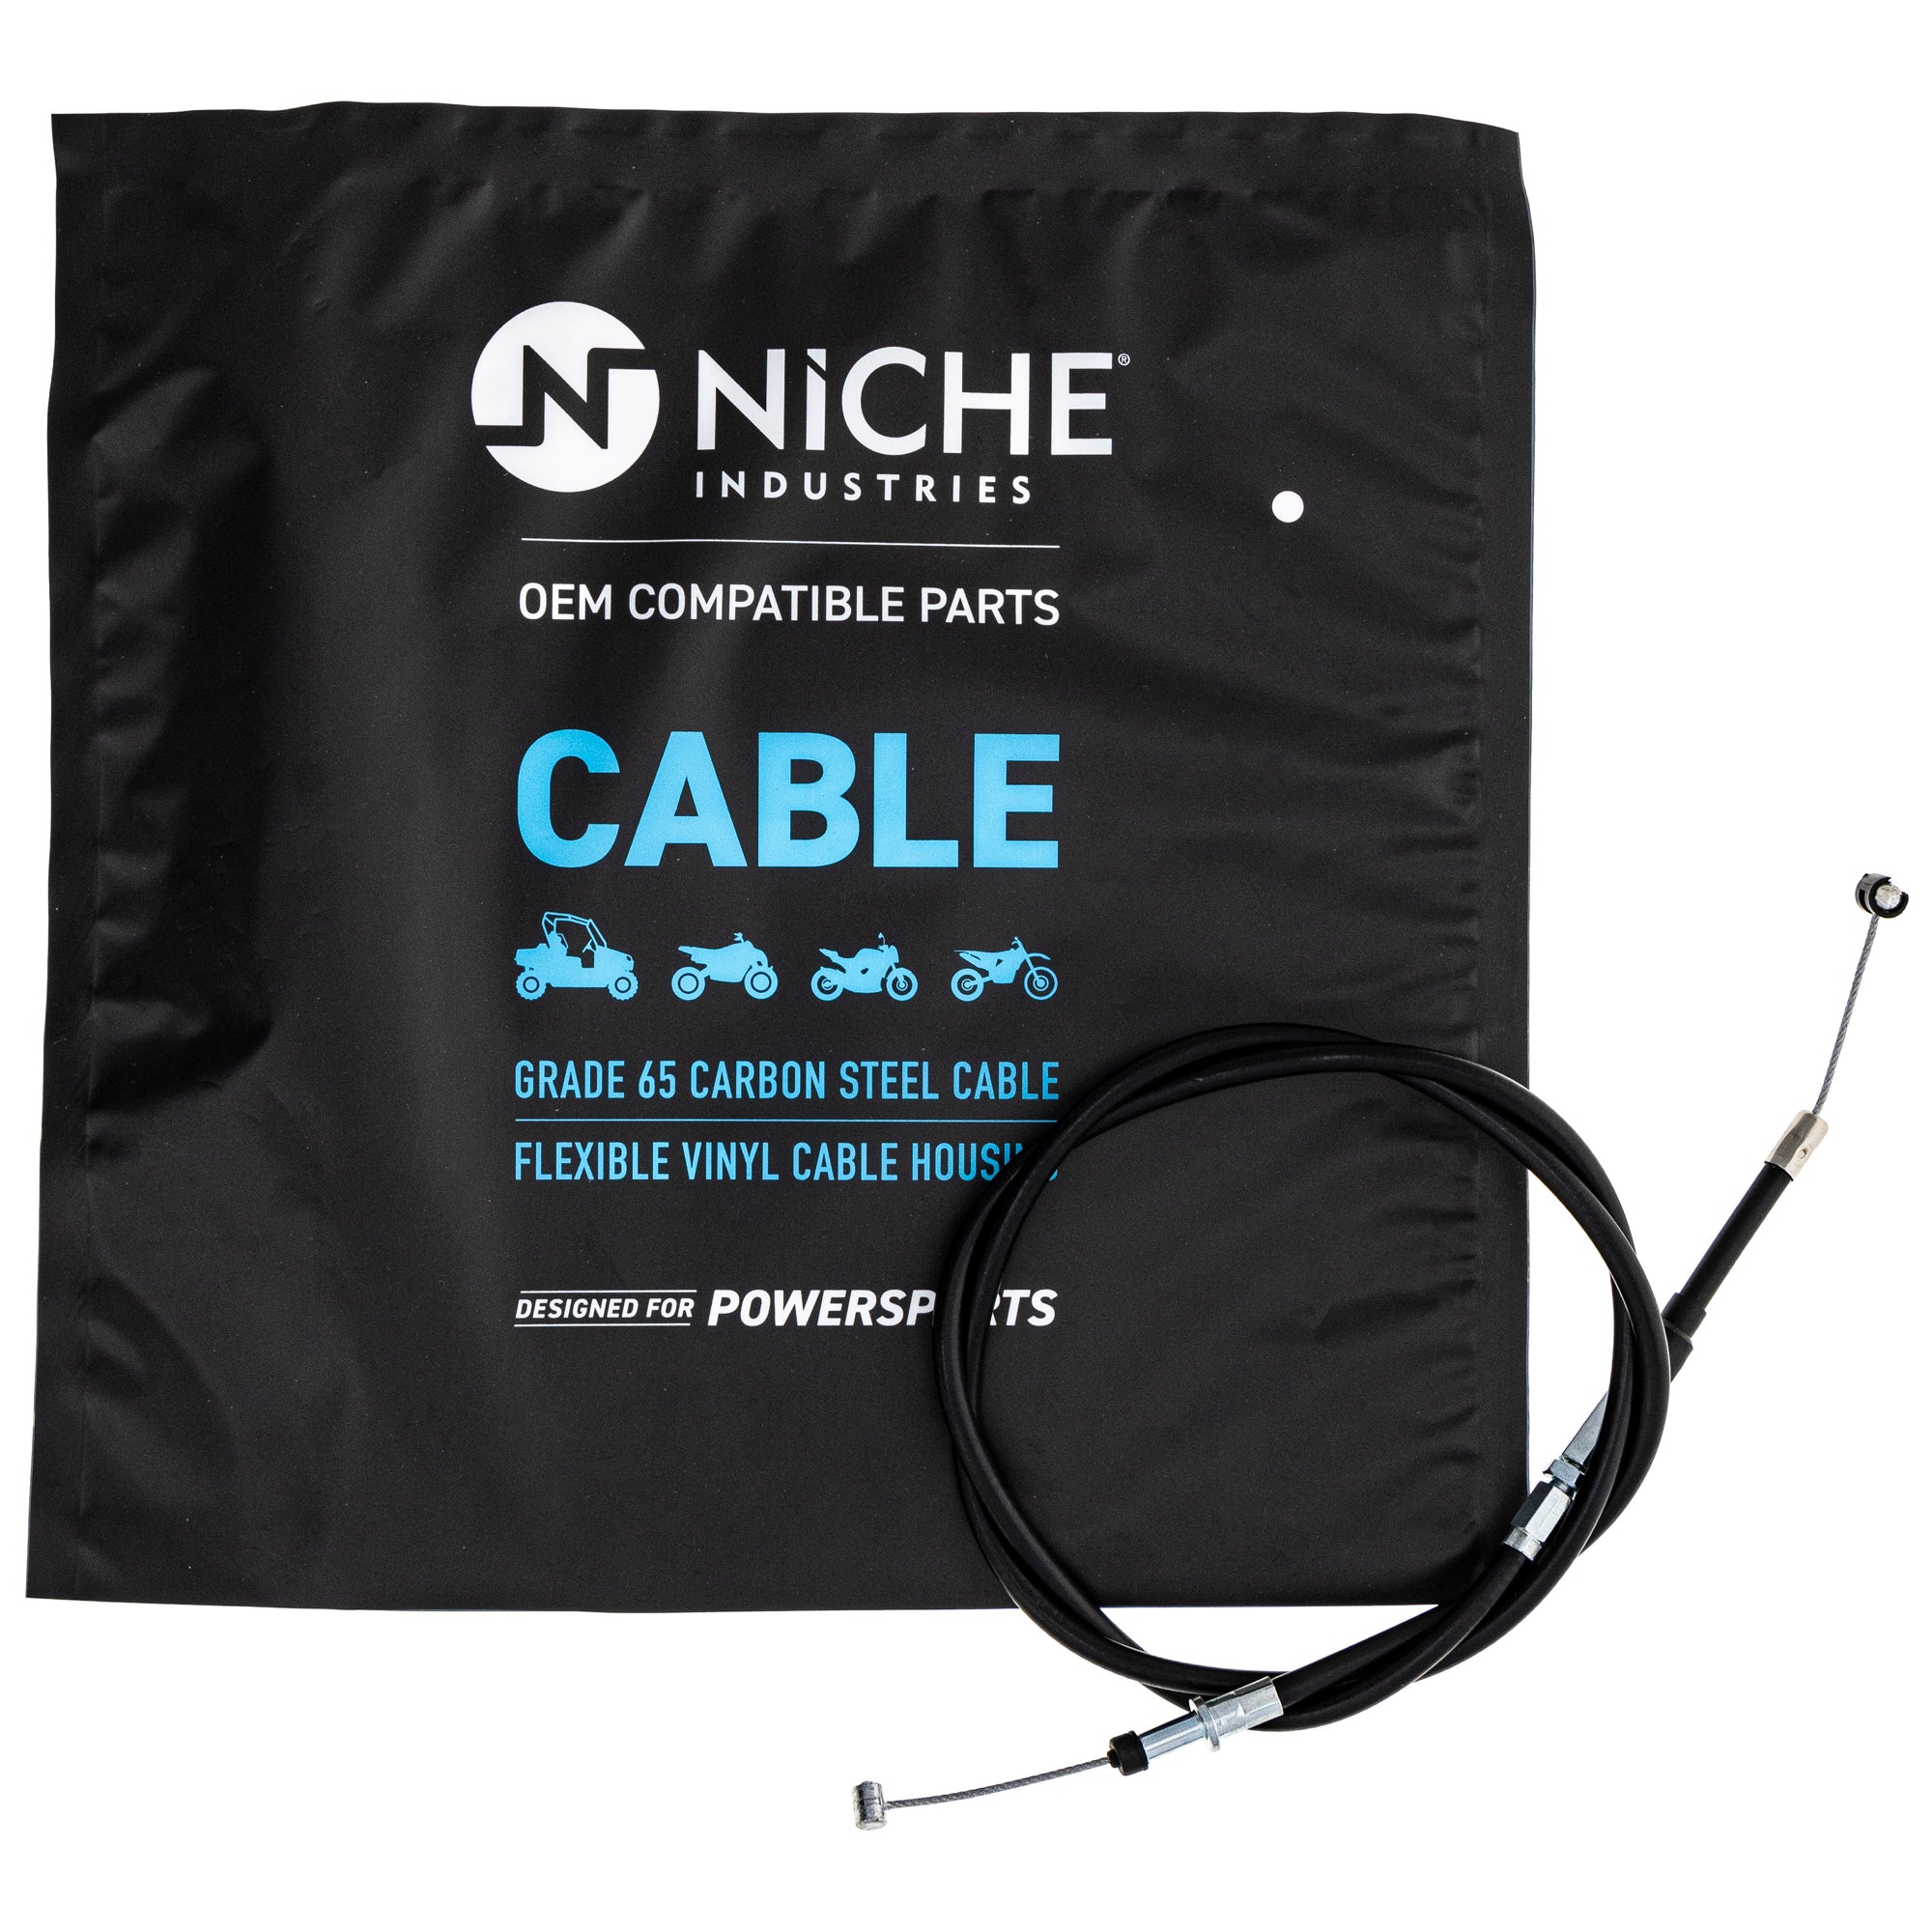 NICHE 519-CCB2809L Clutch Cable for zOTHER KX125 KDX200